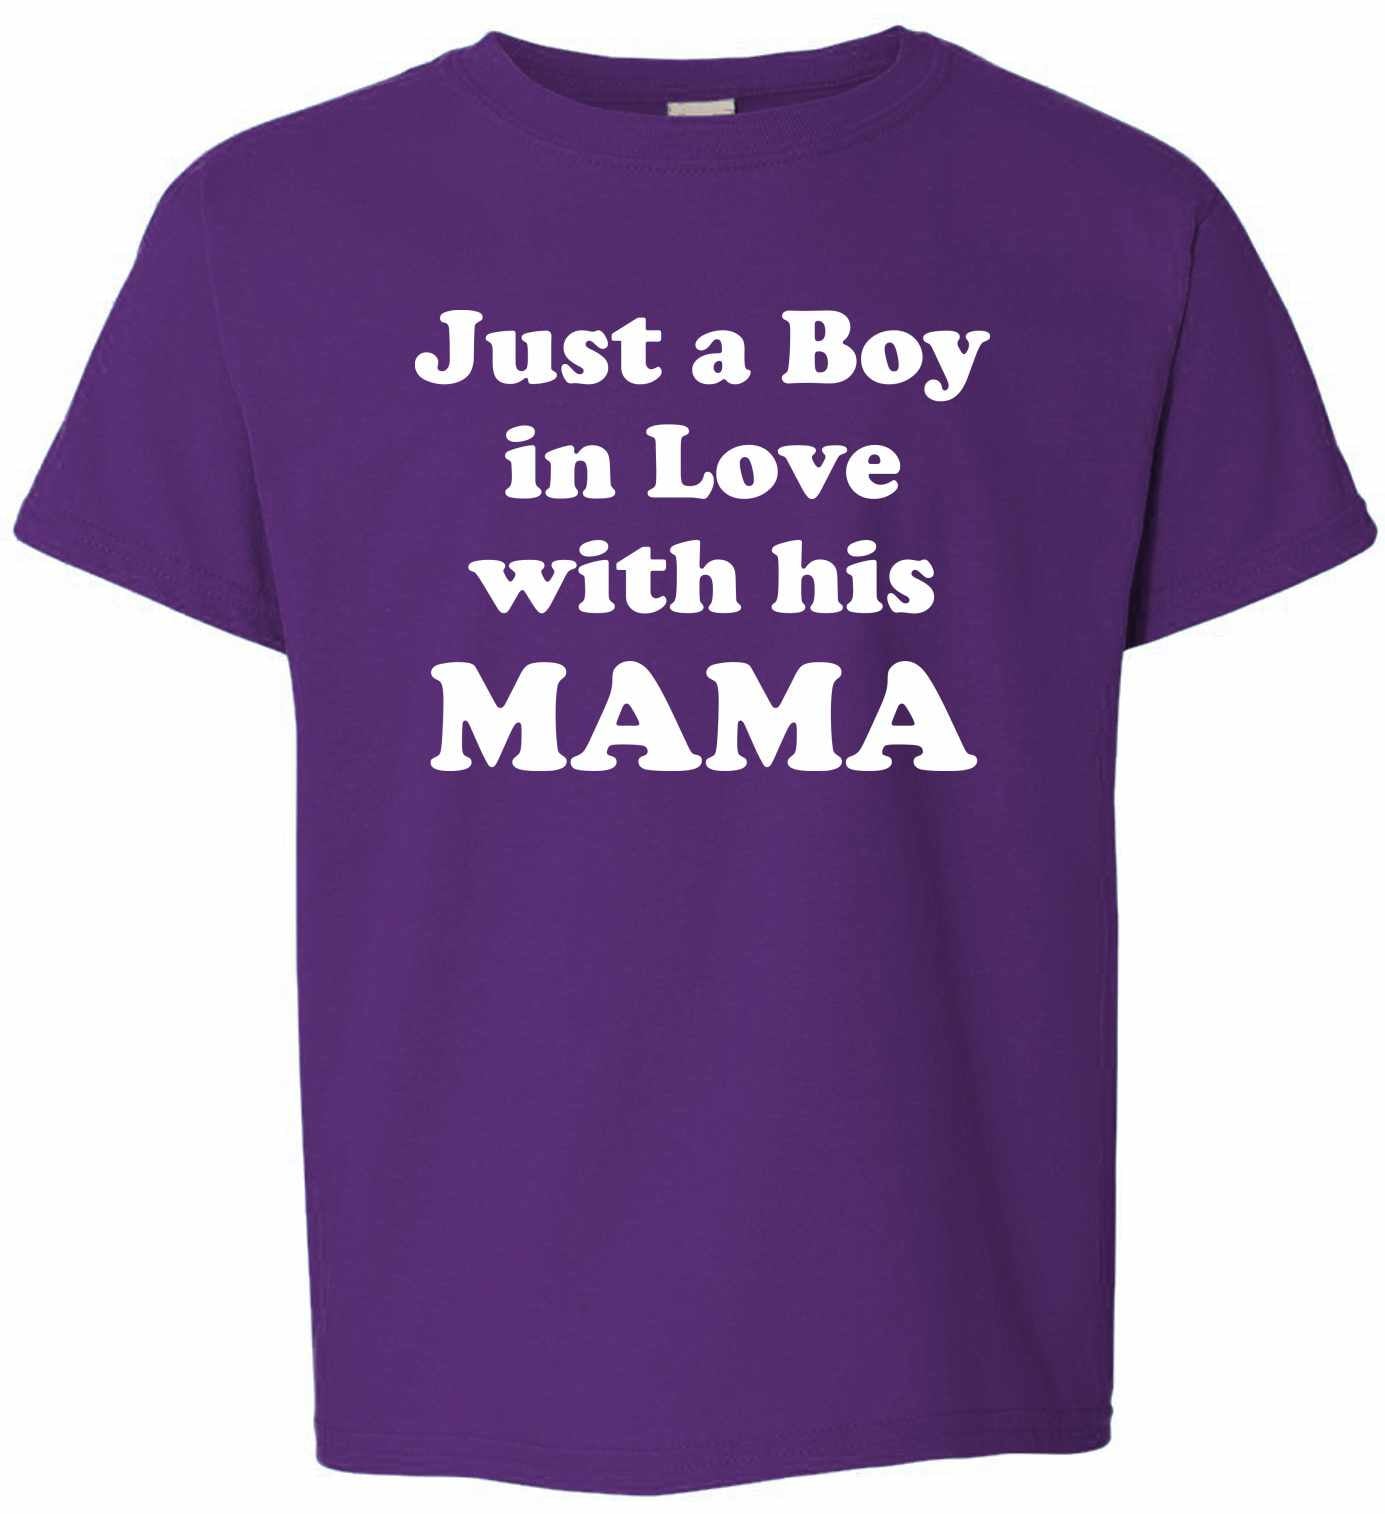 Just a Boy in Love with his MAMA on Kids T-Shirt (#1097-201)